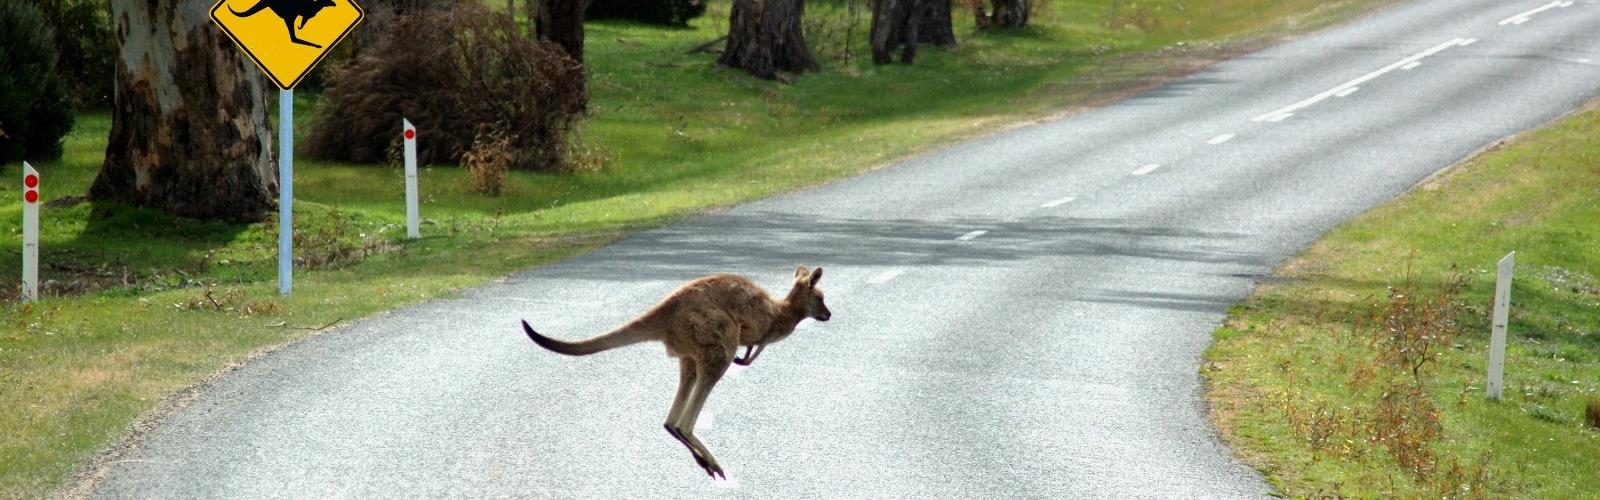 Driving with Kangaroos on the Road in Australia